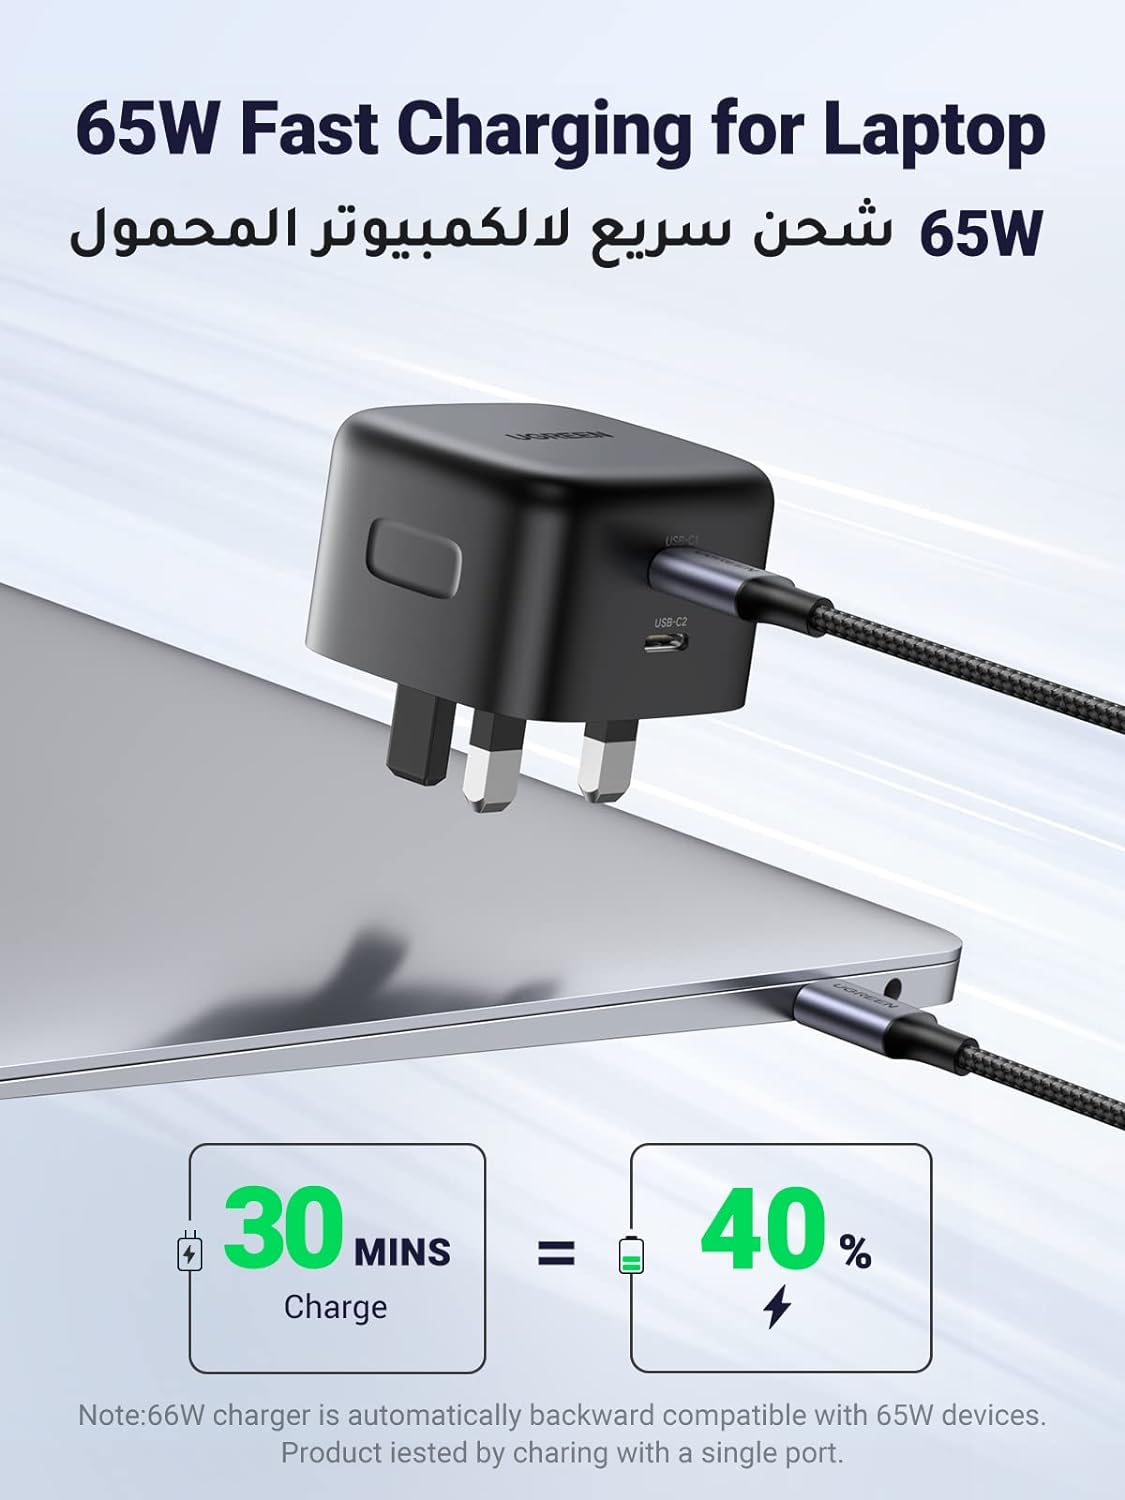 UGREEN 65W USB C PD Charger, GaN Charger Dual Type C Wall Charger Plug, USB Power Adapter Compatible with Macbook, iPhone, iPad, XPS, Matebook, Lenovo, Steam Deck, HP, Asus, Acer, and More Laptops